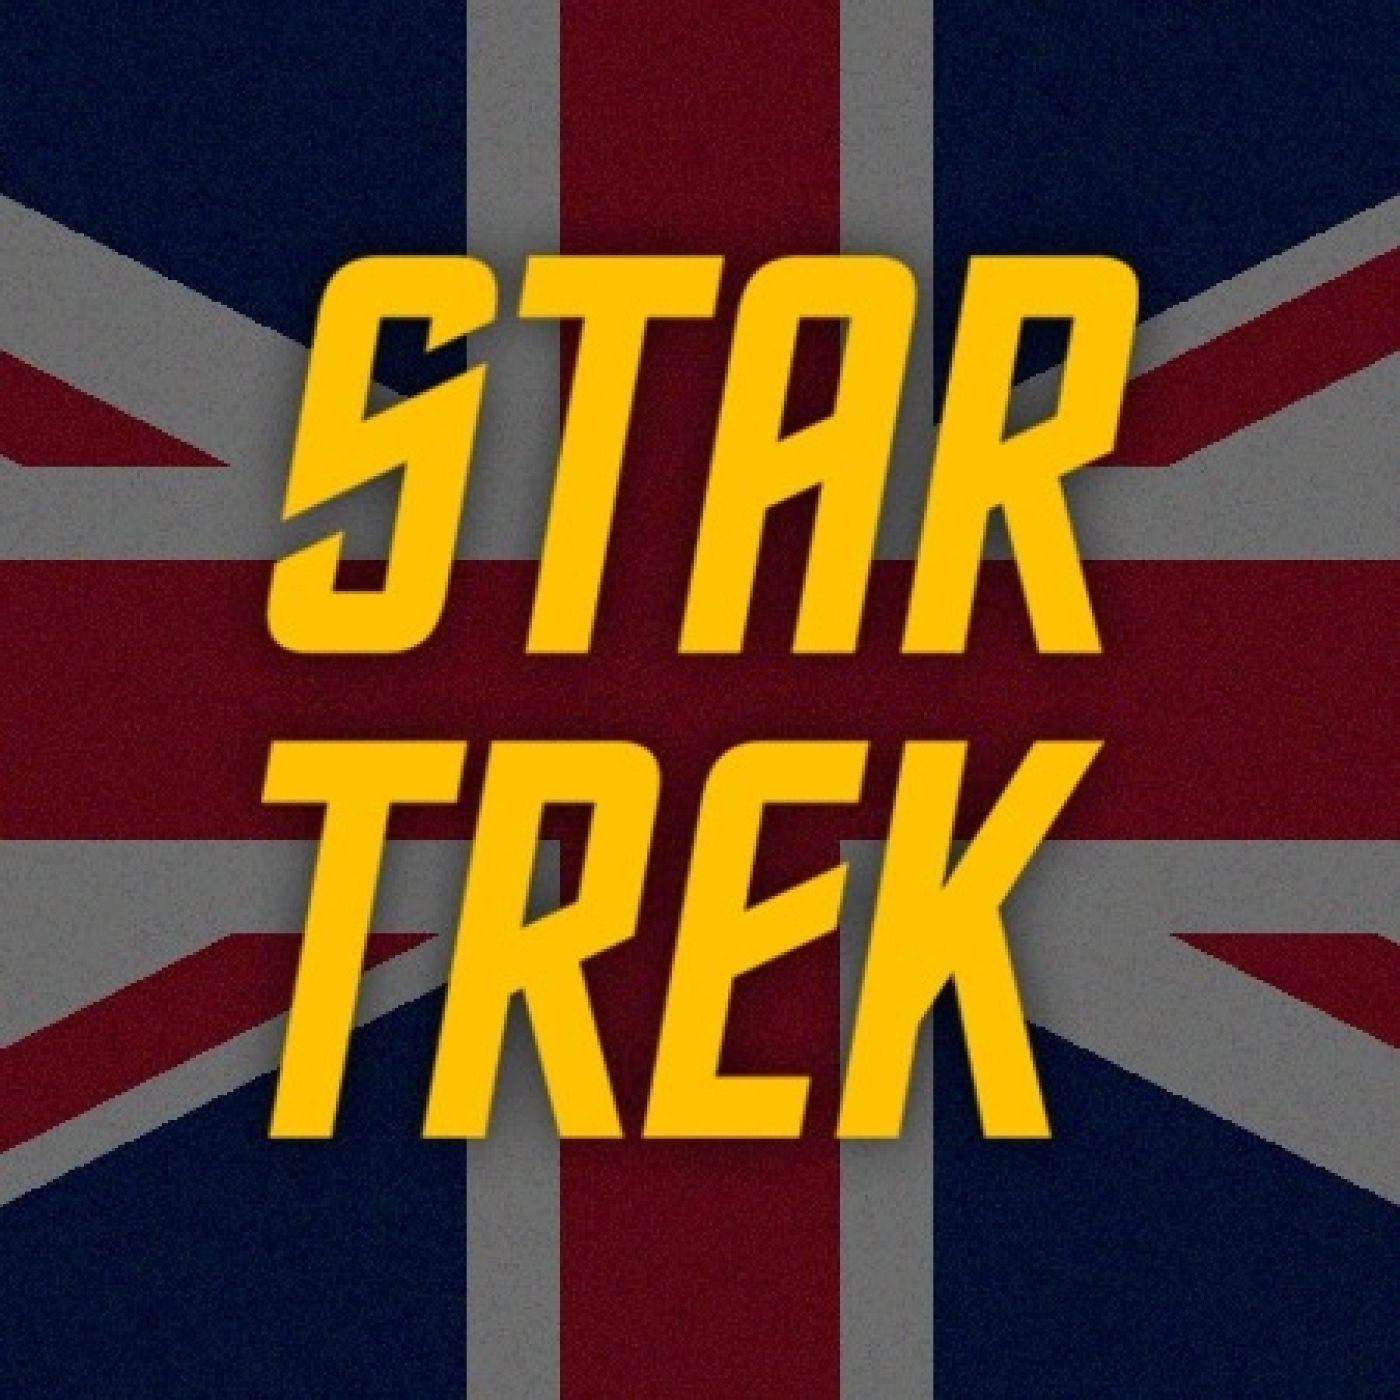 Trek Torpedo – A friendly chat about Star Trek – With Andreu and Dave